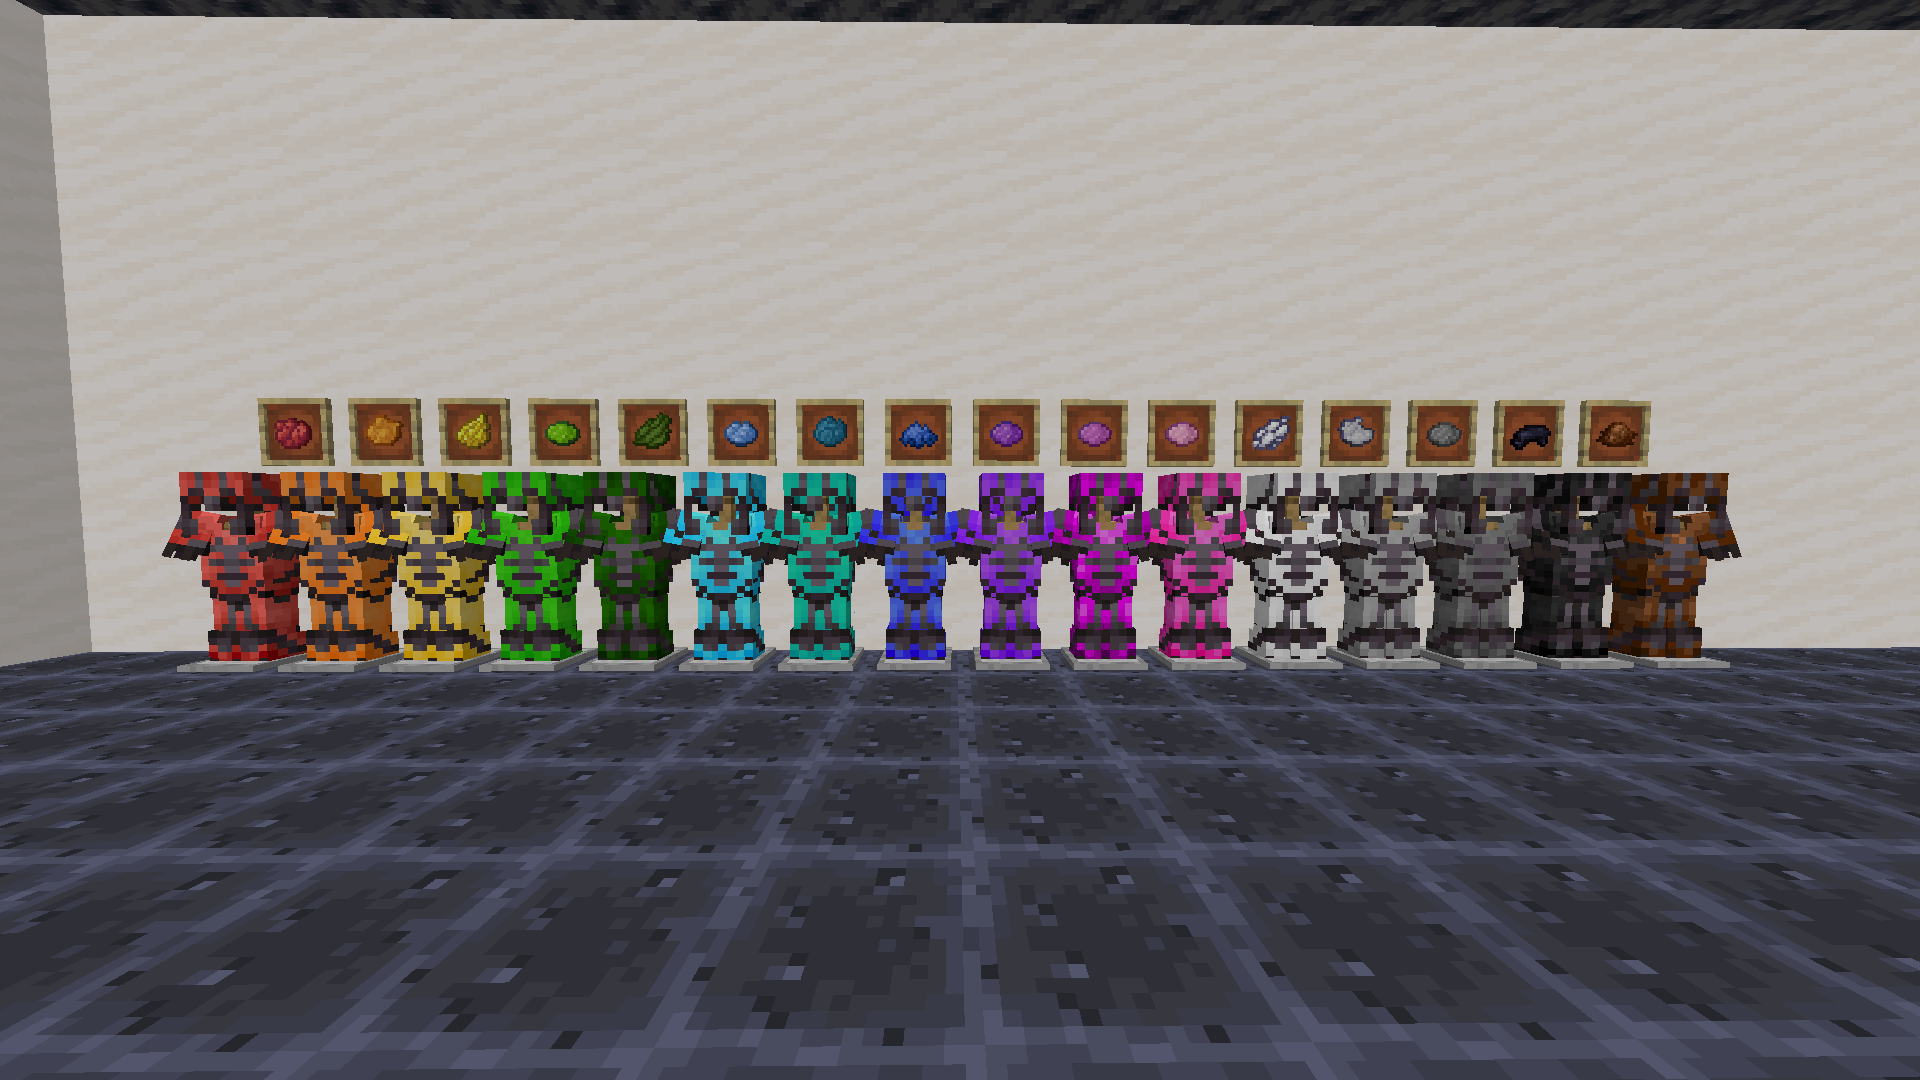 All 16 dyes can be used